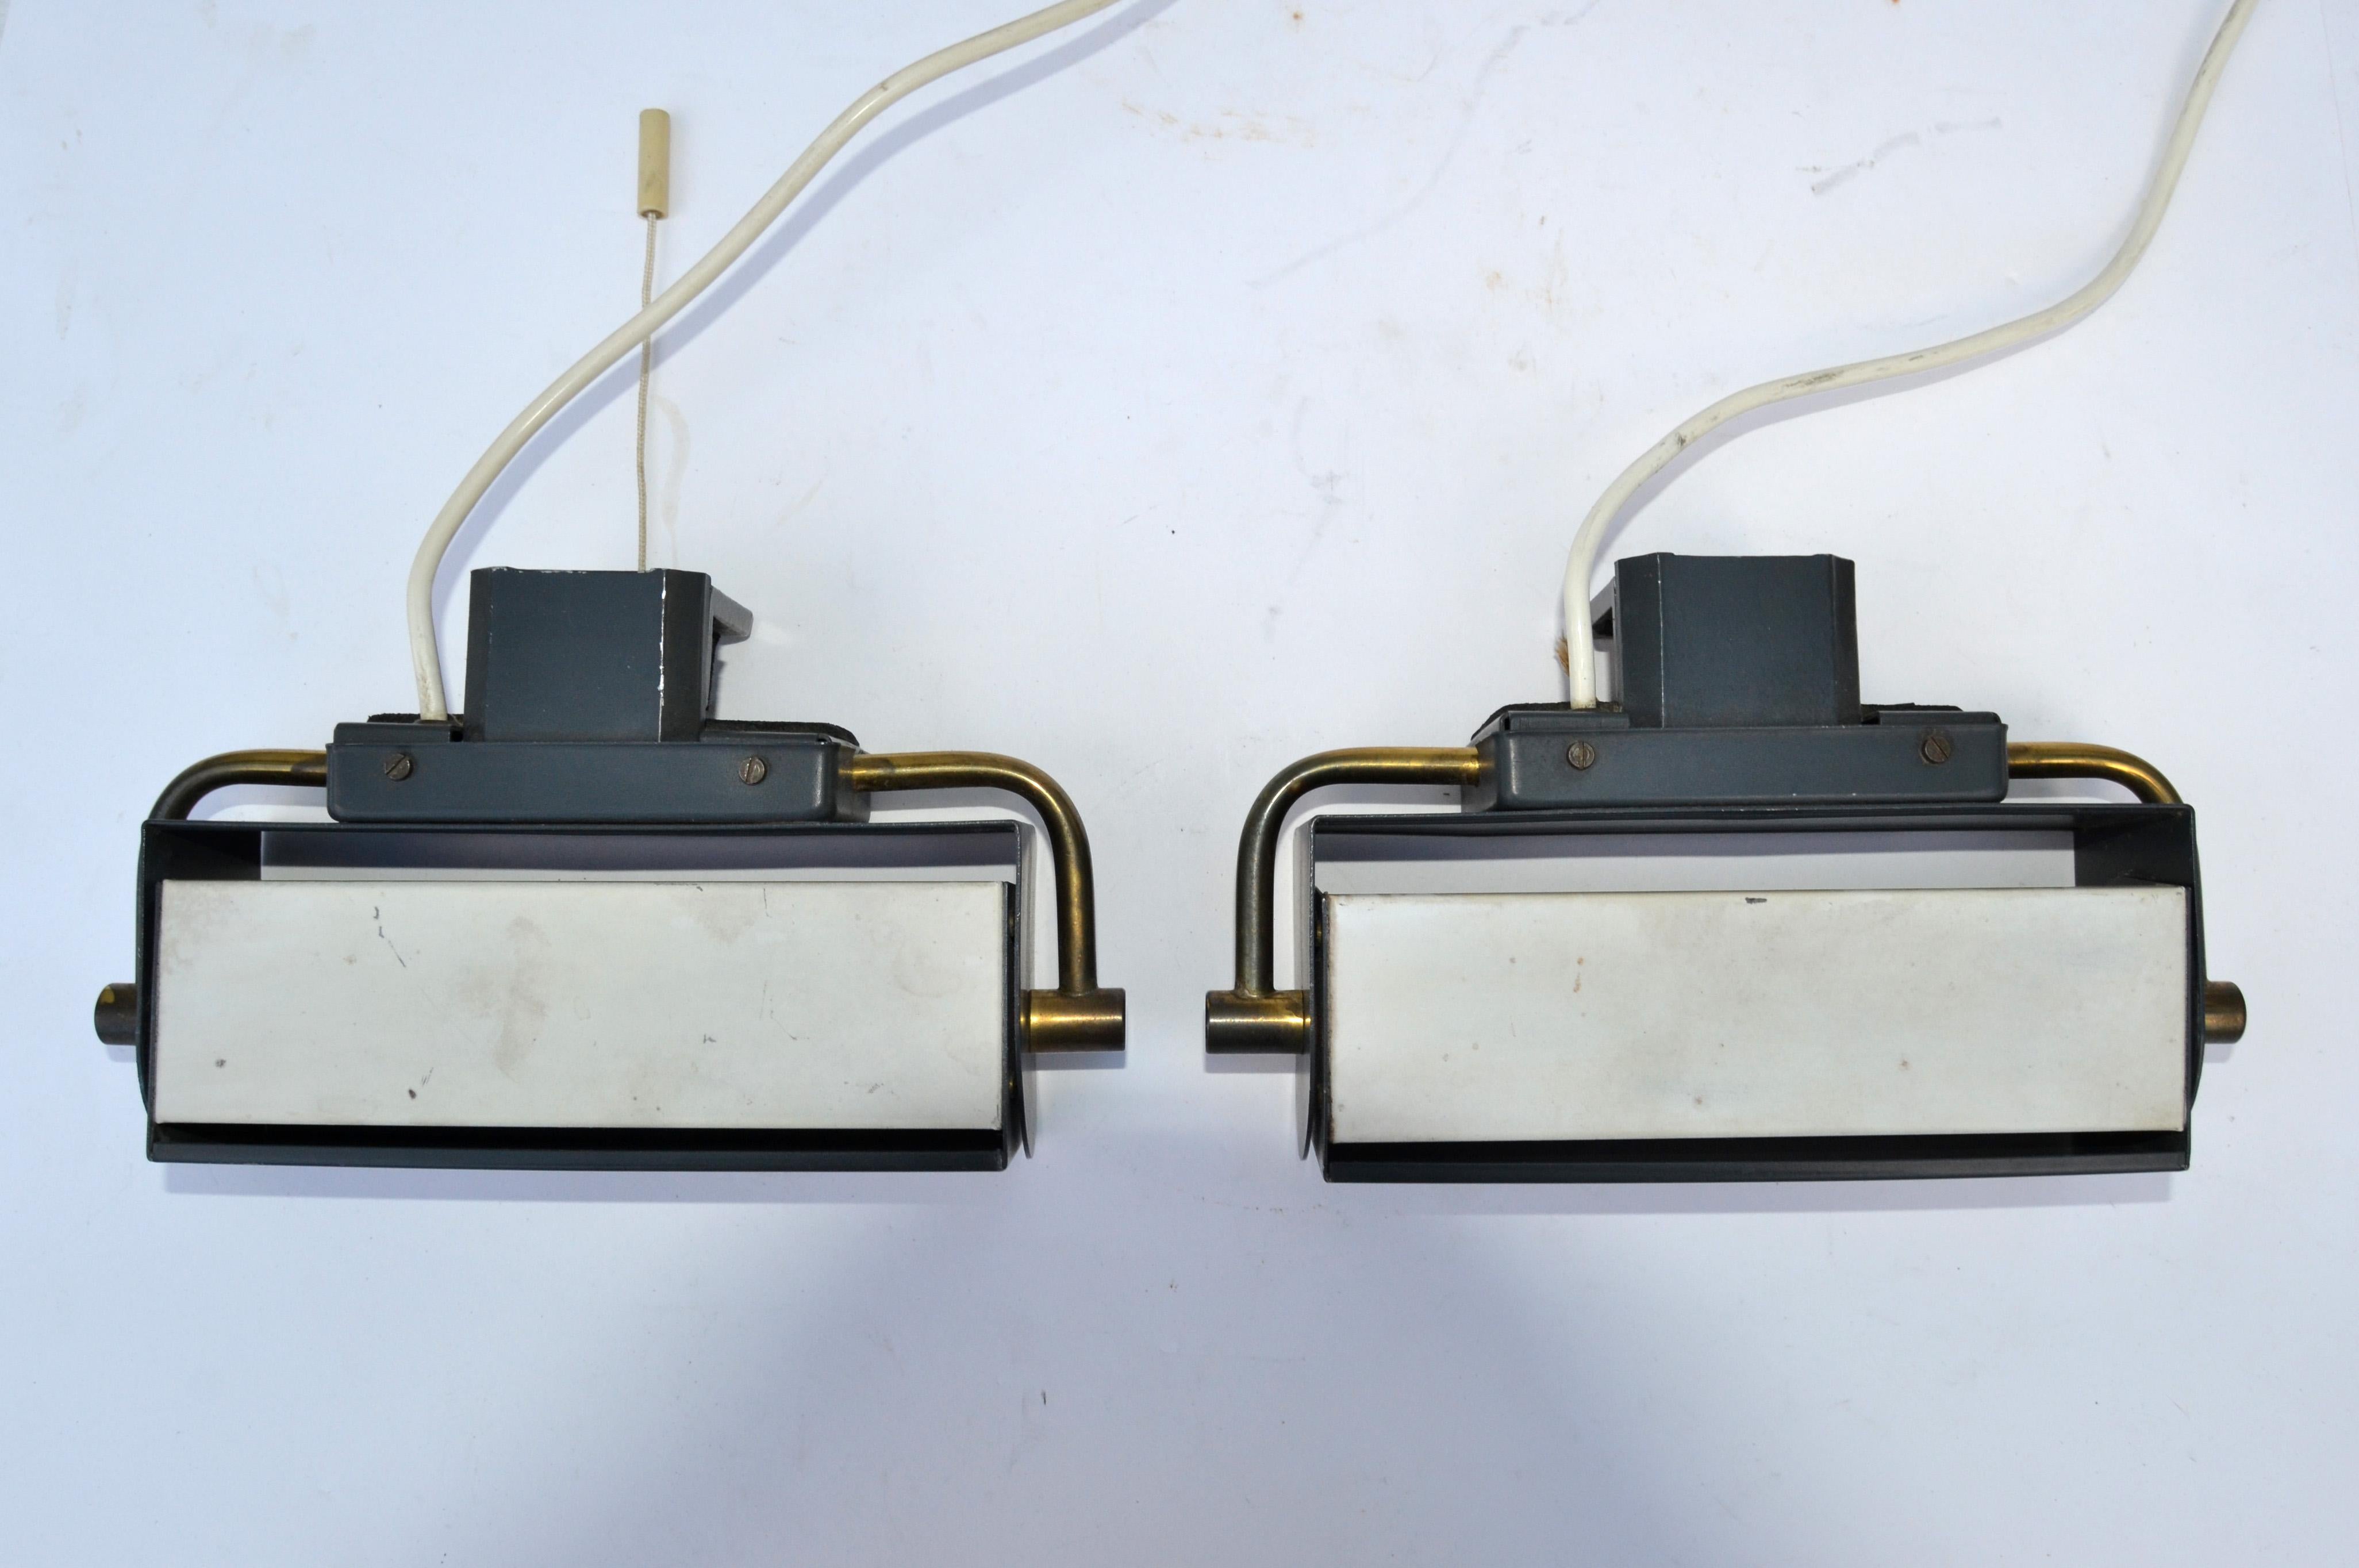 Pair, Jacques Biny Style Sconces Brass & Steel French Mid-Century Modern, 1955 For Sale 5